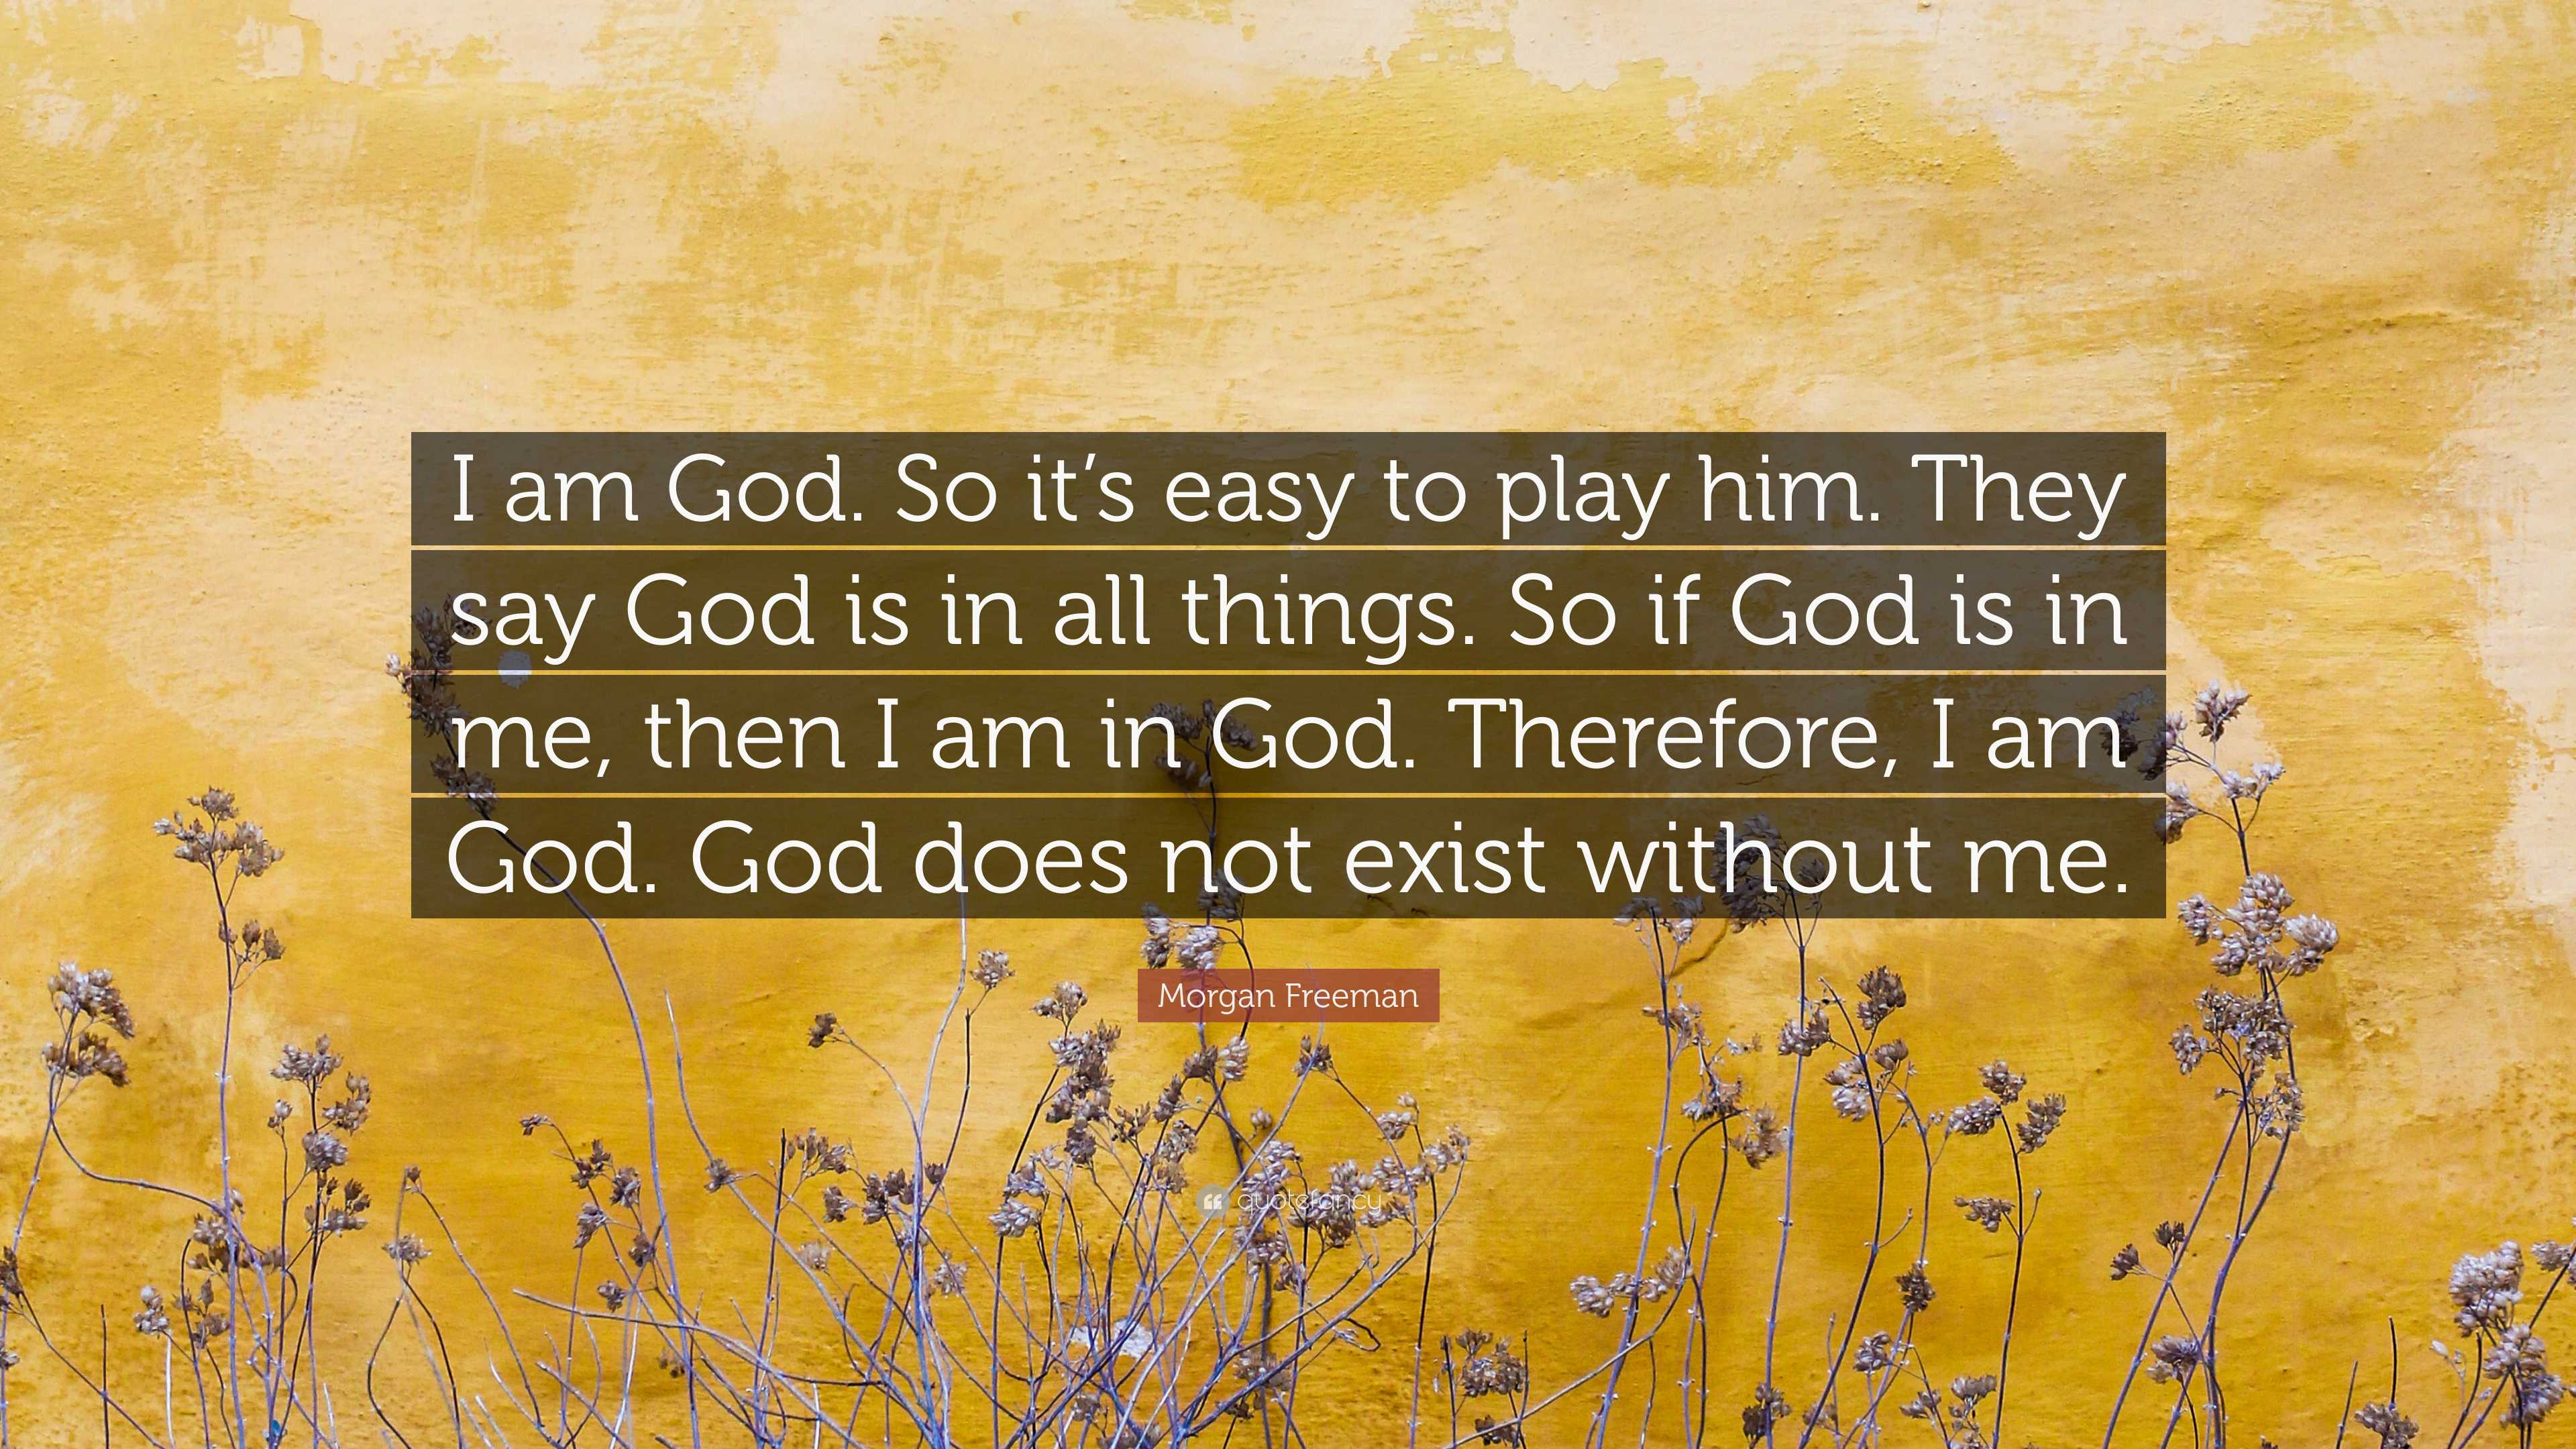 Morgan Freeman Quote: “I am God. So it's easy to play him. They say God is